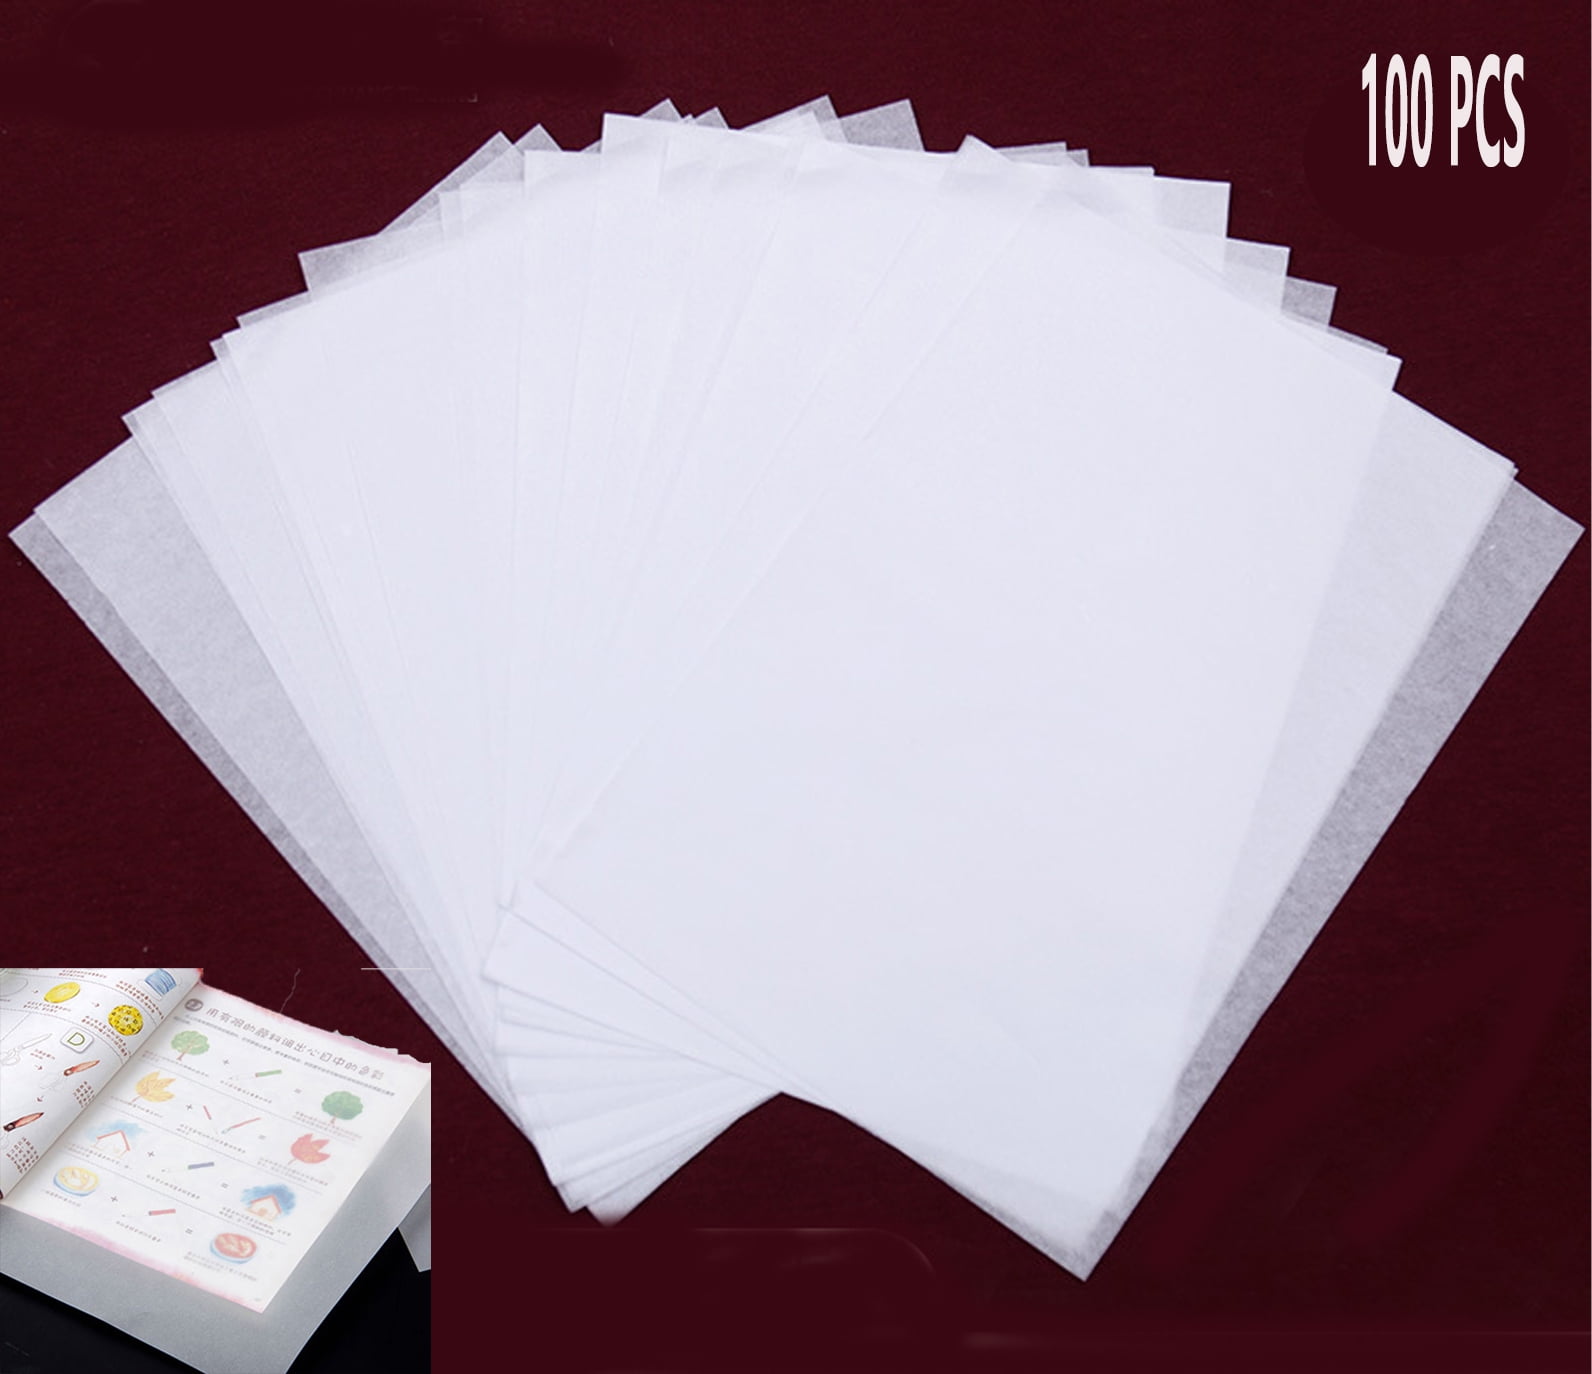 100 Sheets Tracing Paper 8x11 in White Trace Paper for Pencil Sketching  Tracing Printing Drawing Animation